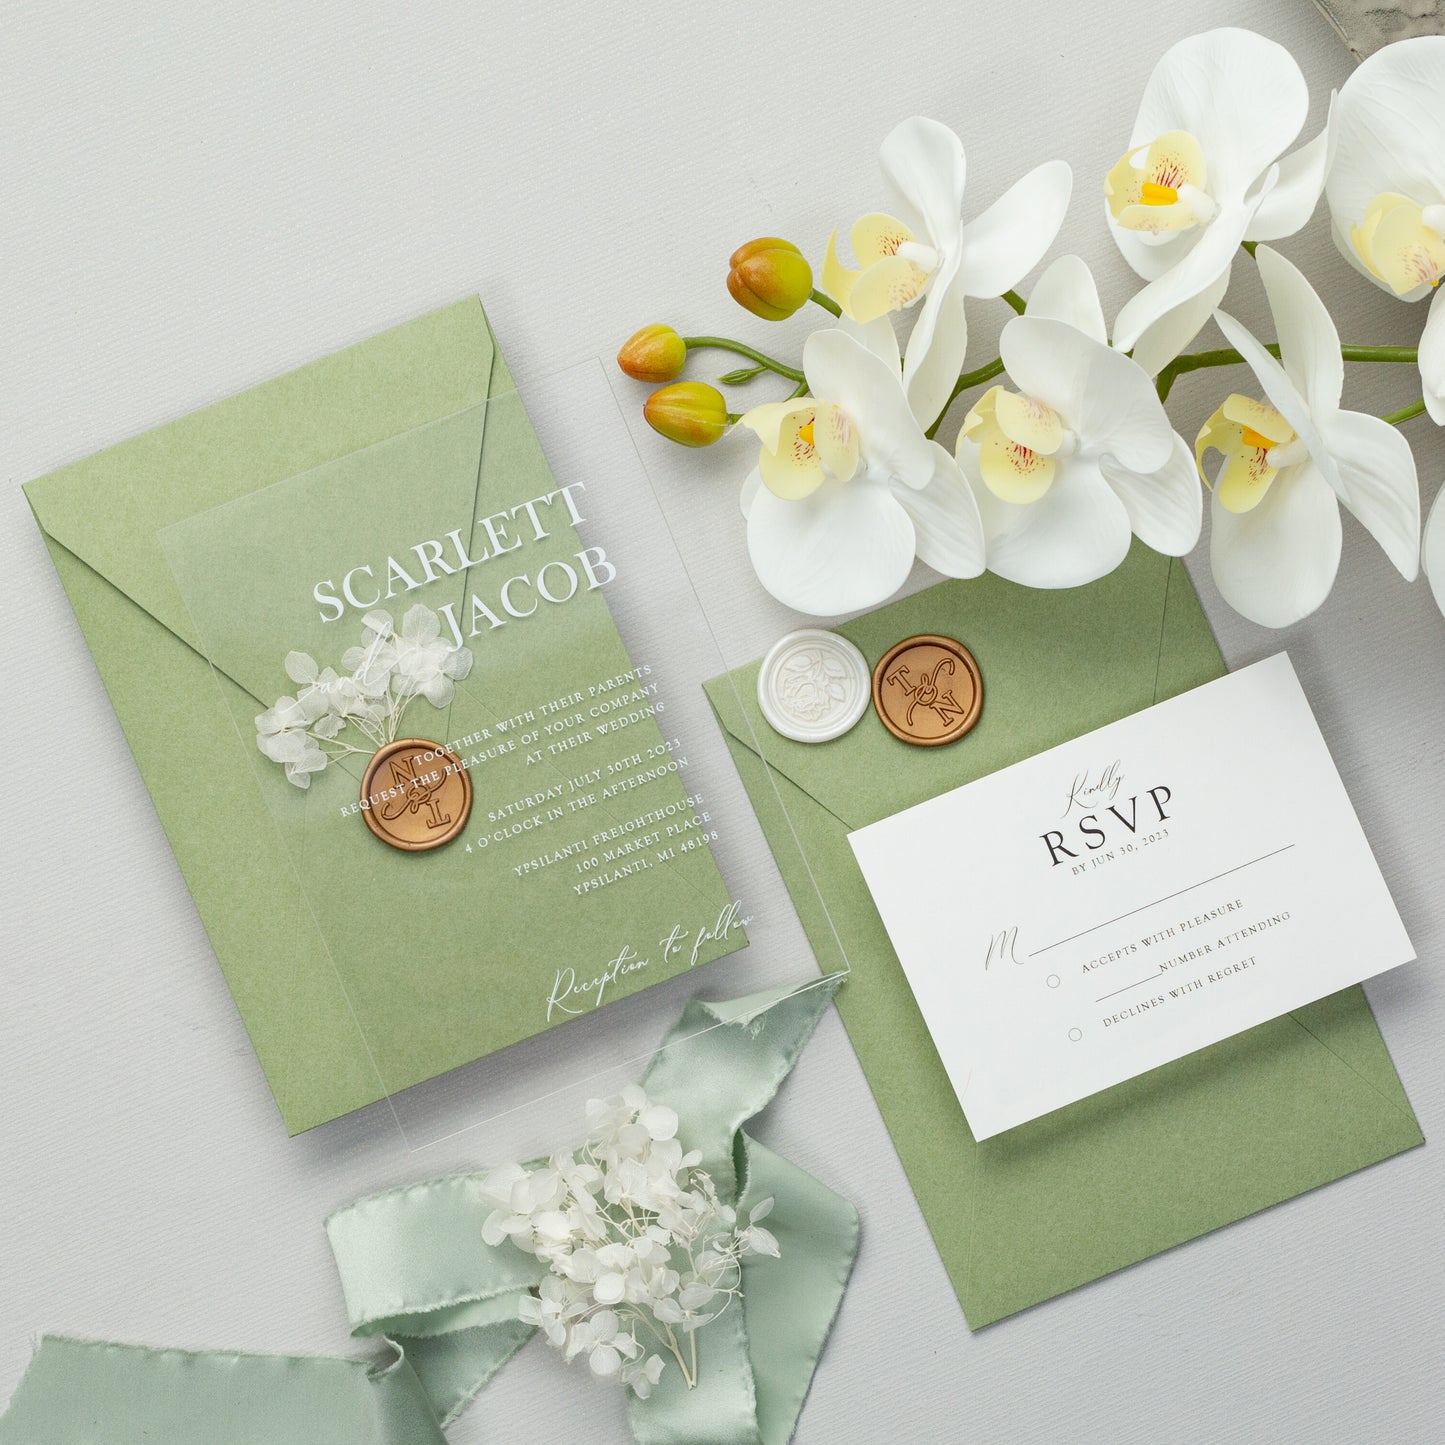 Simple acrylic wedding invitations with sage green envelopes